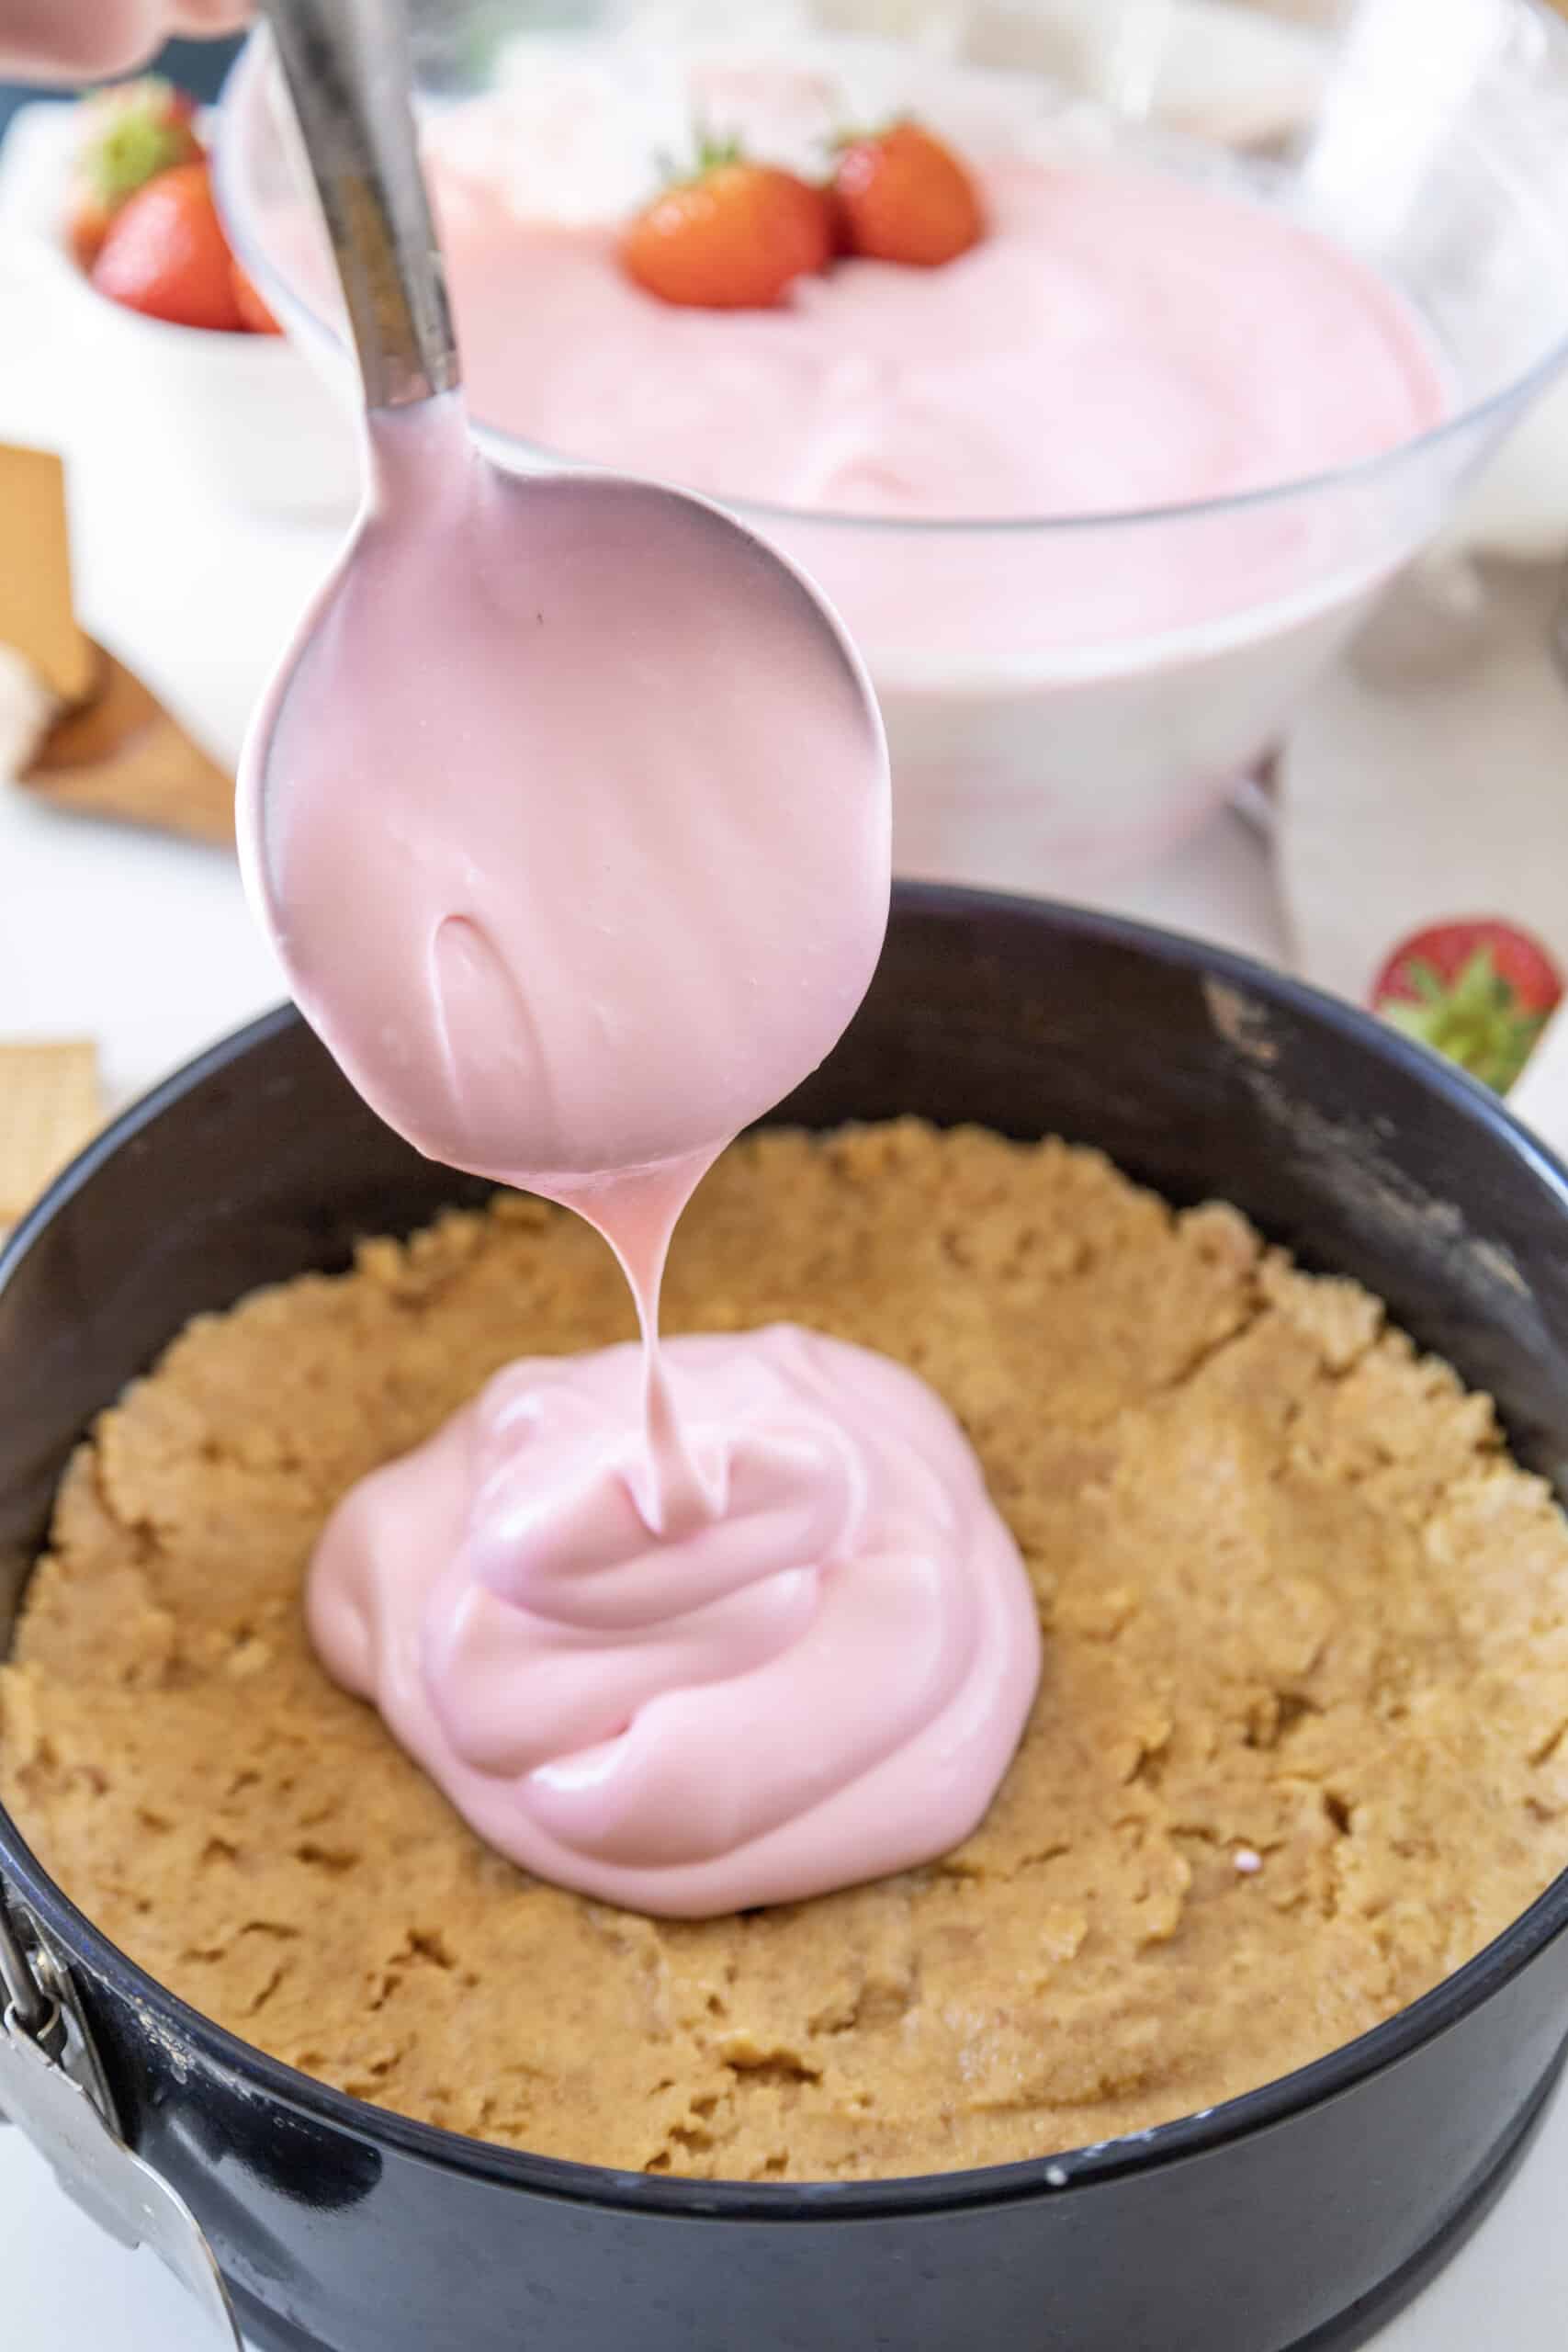 Pour the filling for your Philadelphia no bake strawberry cheesecake into the crust.